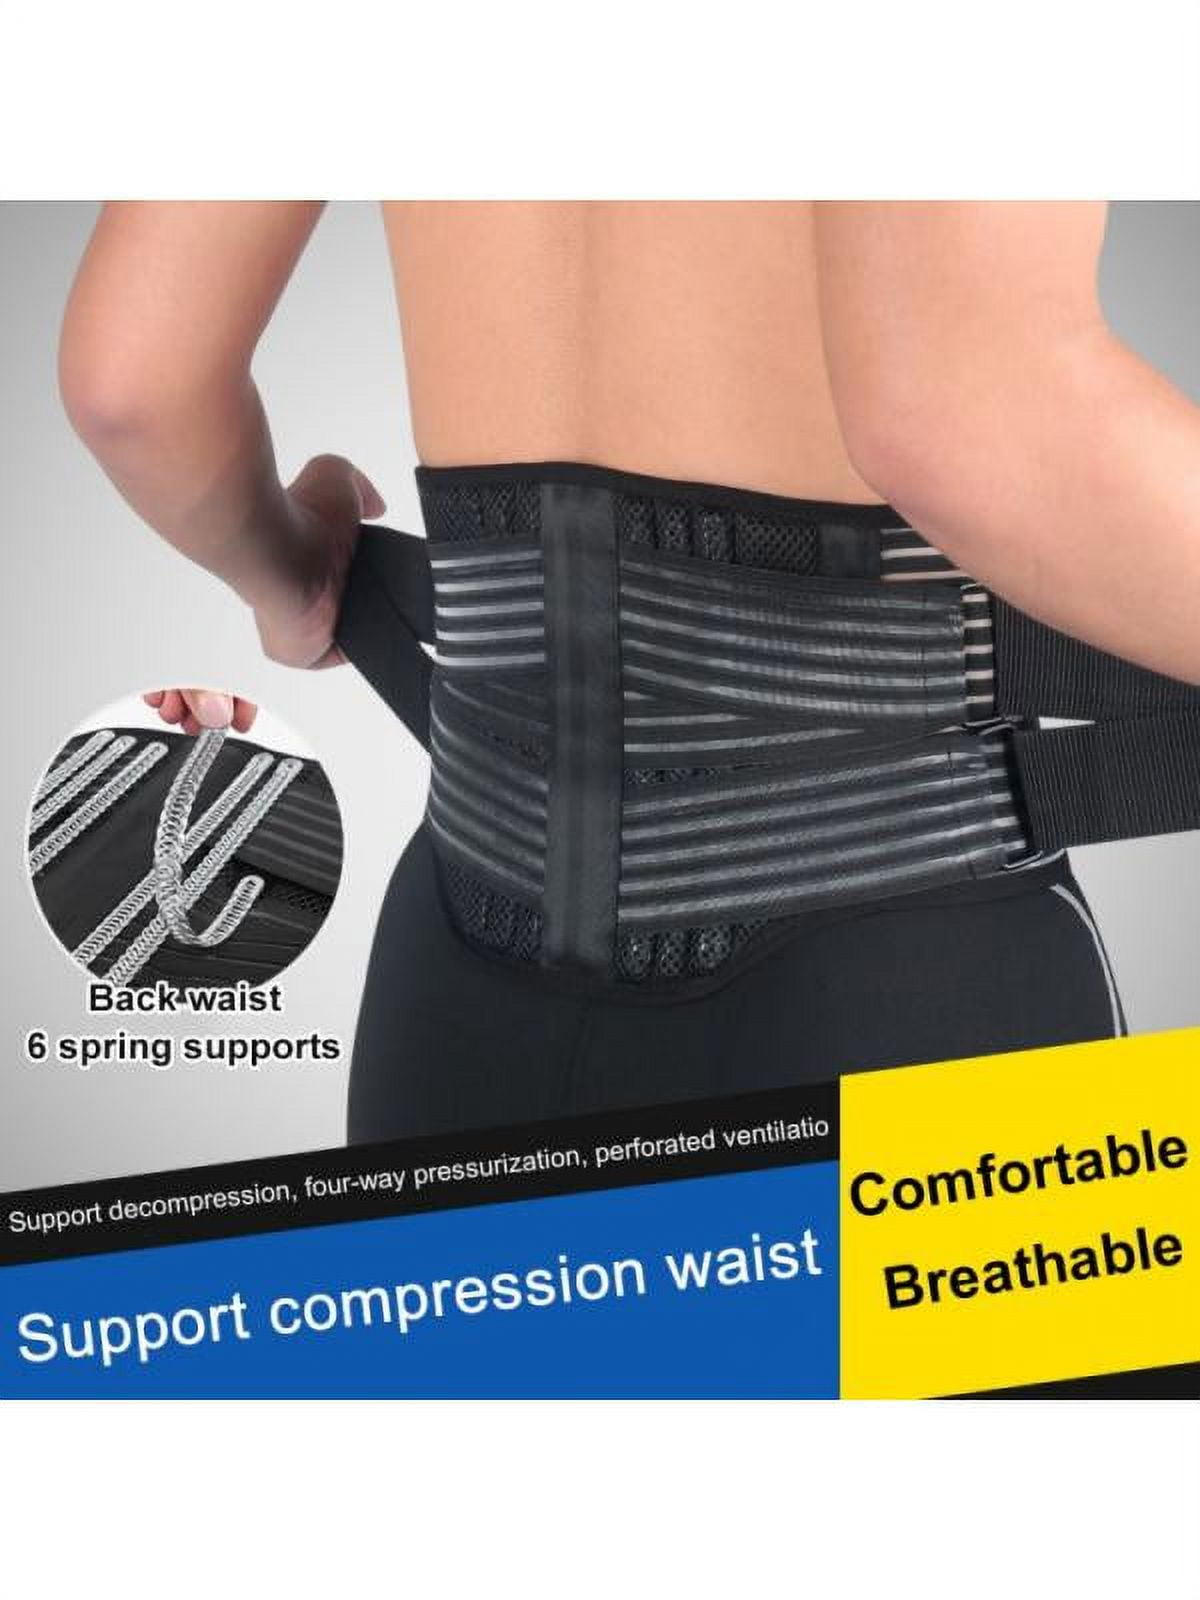 Support Belt - Back Bace for Women Men - Waist Back Support Belt with  Removable Metal Spring Strip for Back Pain Relief, Sciatica, Spinal  Stenosis, Scoliosis or Herniated Disc 